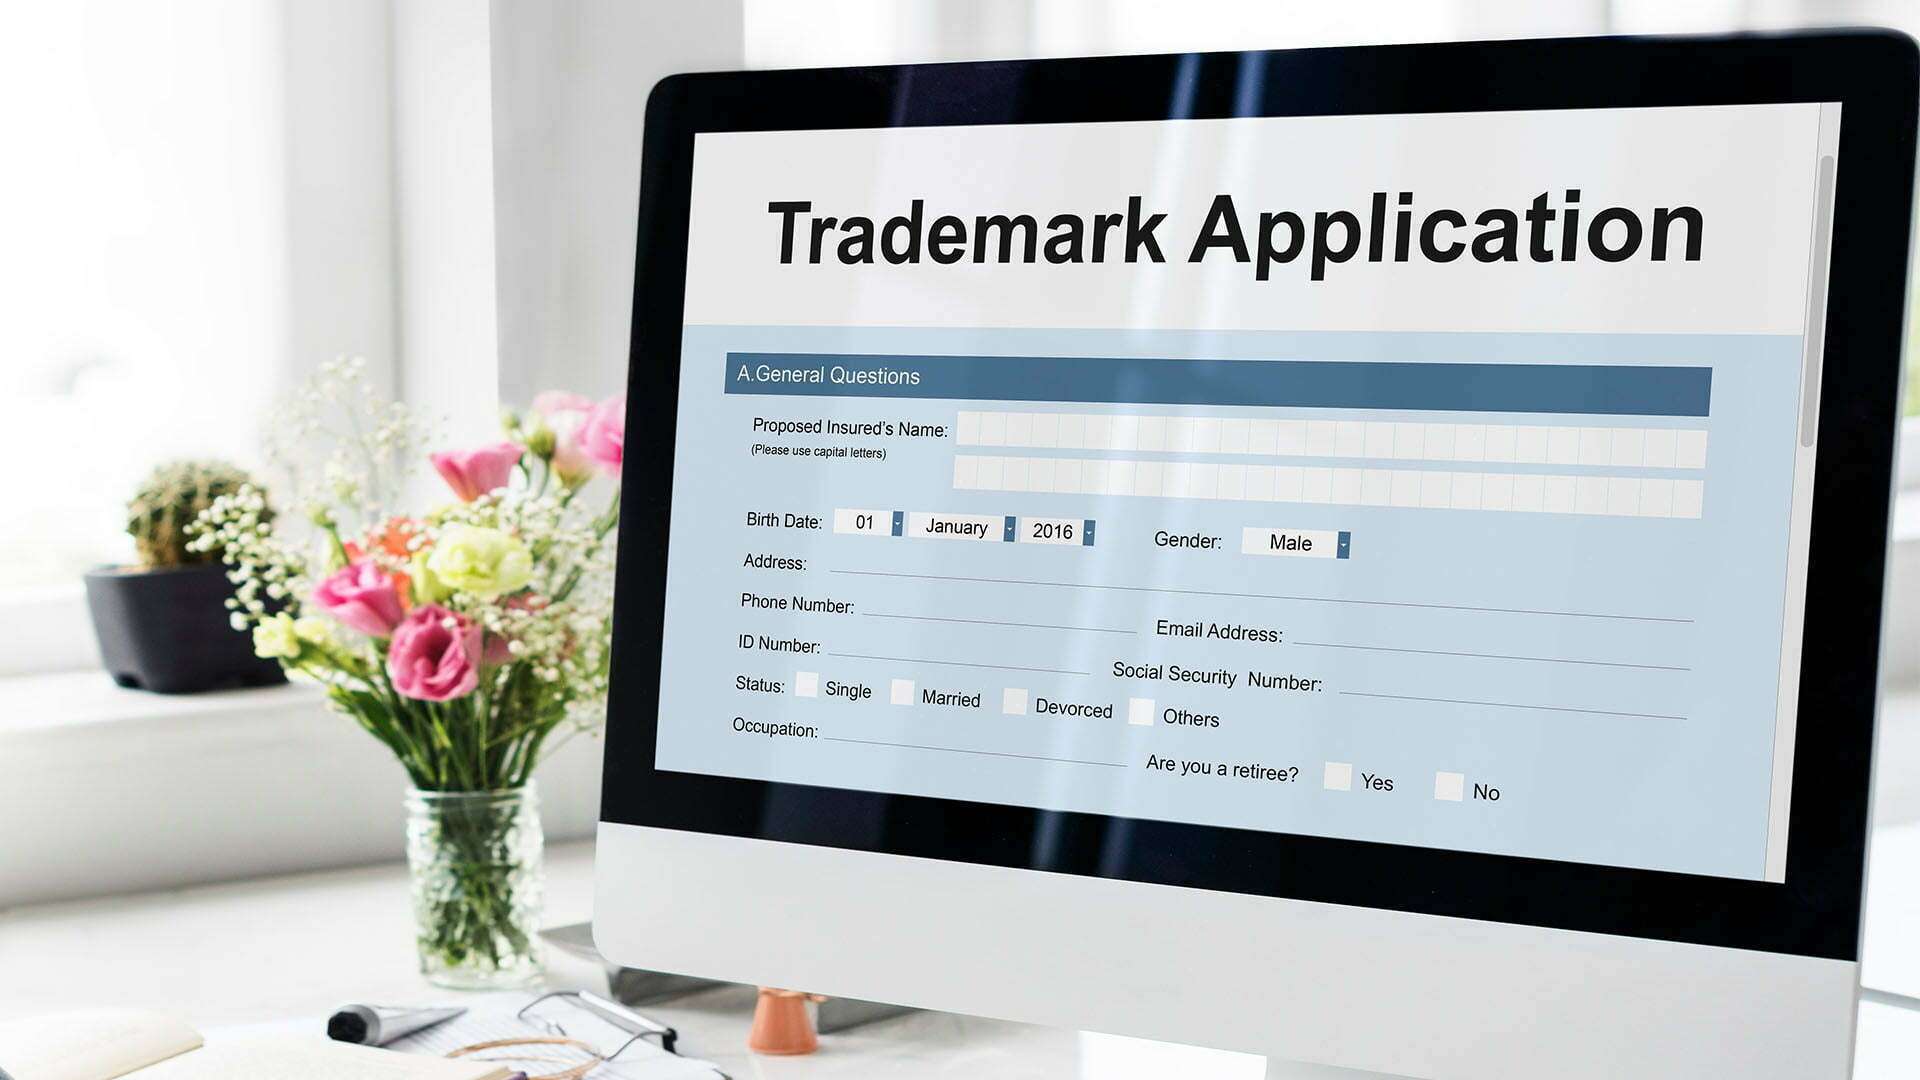 Eligibility For Trademark In The UAE